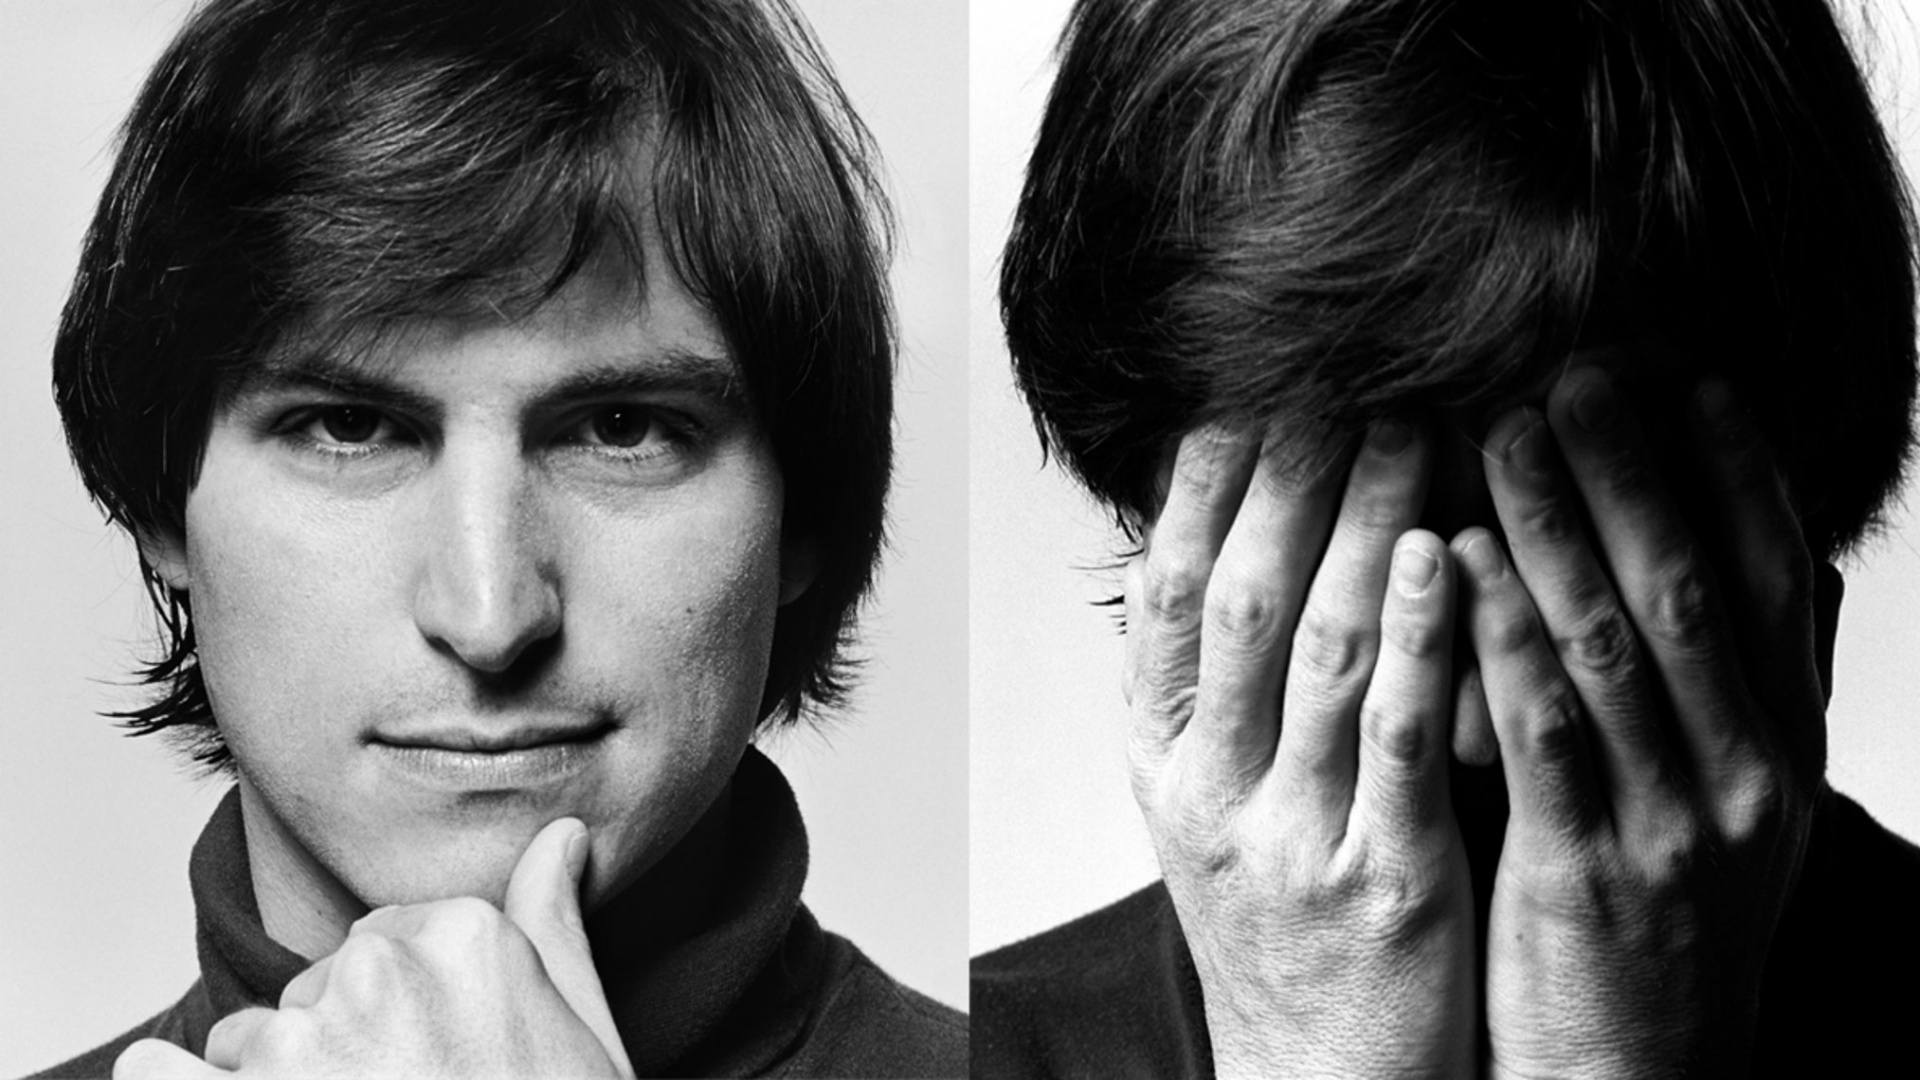 Steve Jobs, Steve Jobs The Man in The Machine, Nose, Eyebrow, Chin. Wallpaper in 1920x1080 Resolution